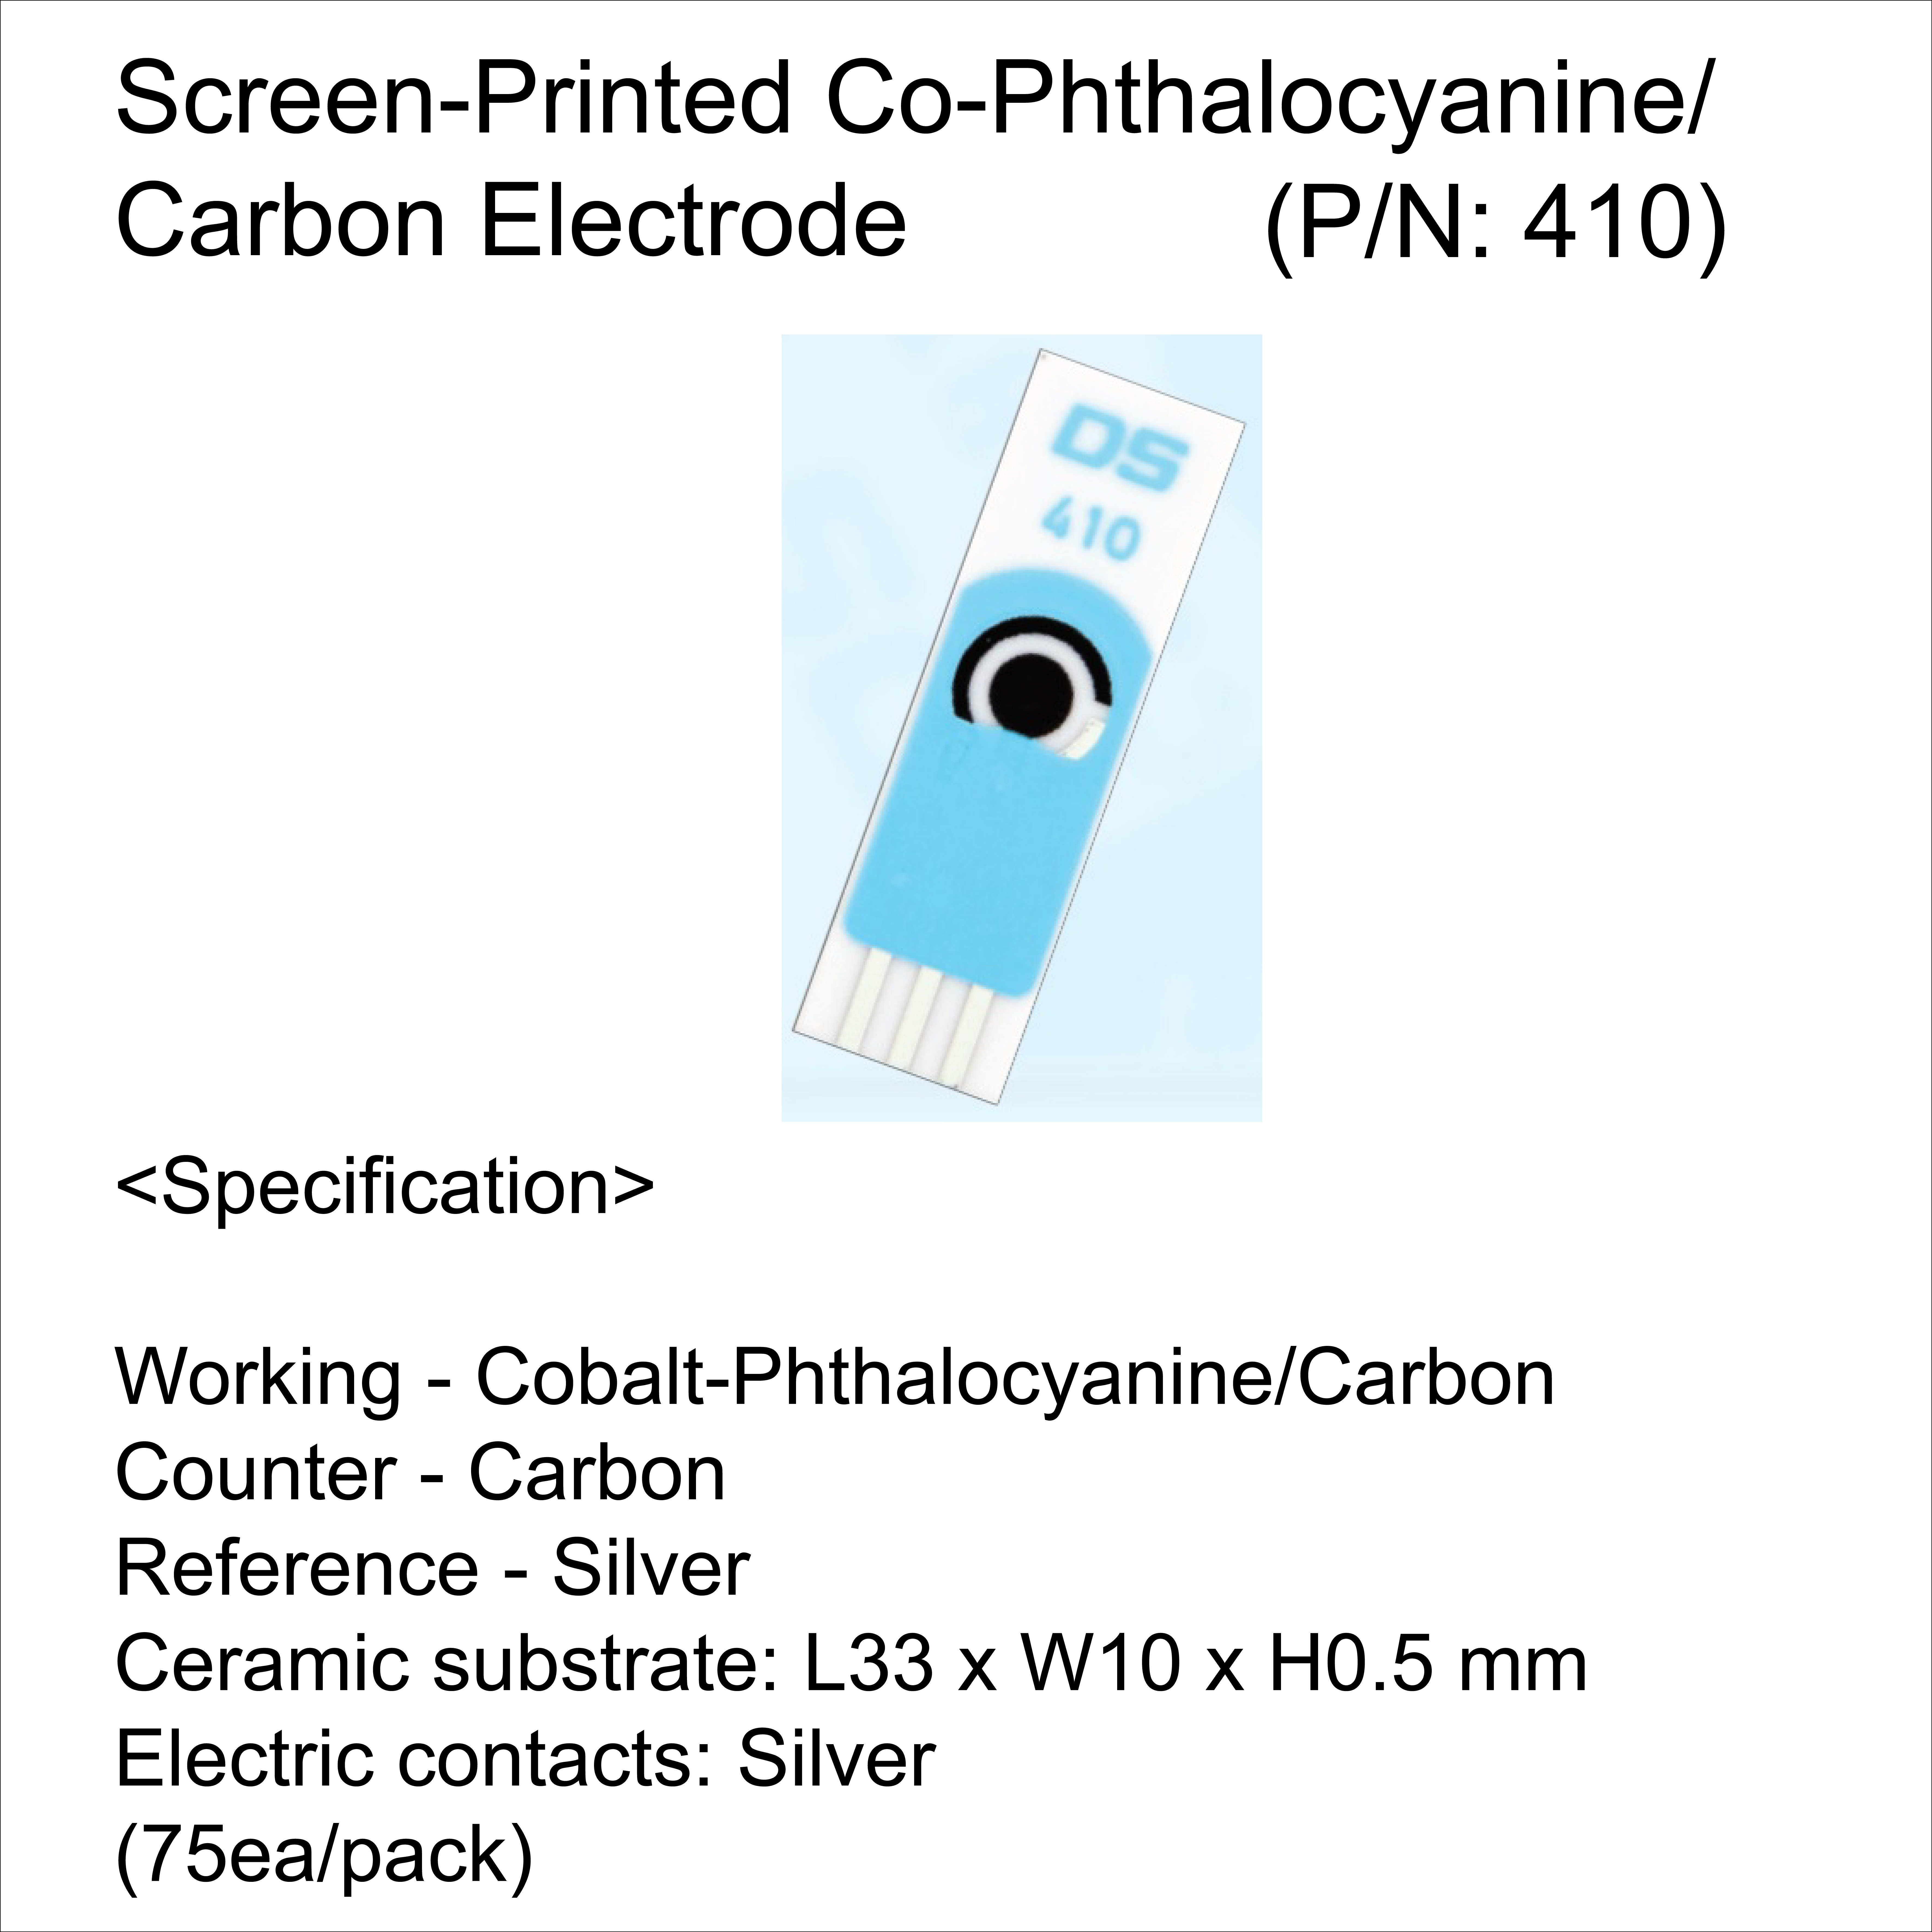 Screen-Printed cobalt-phthalocyanine/Carbon Electrode